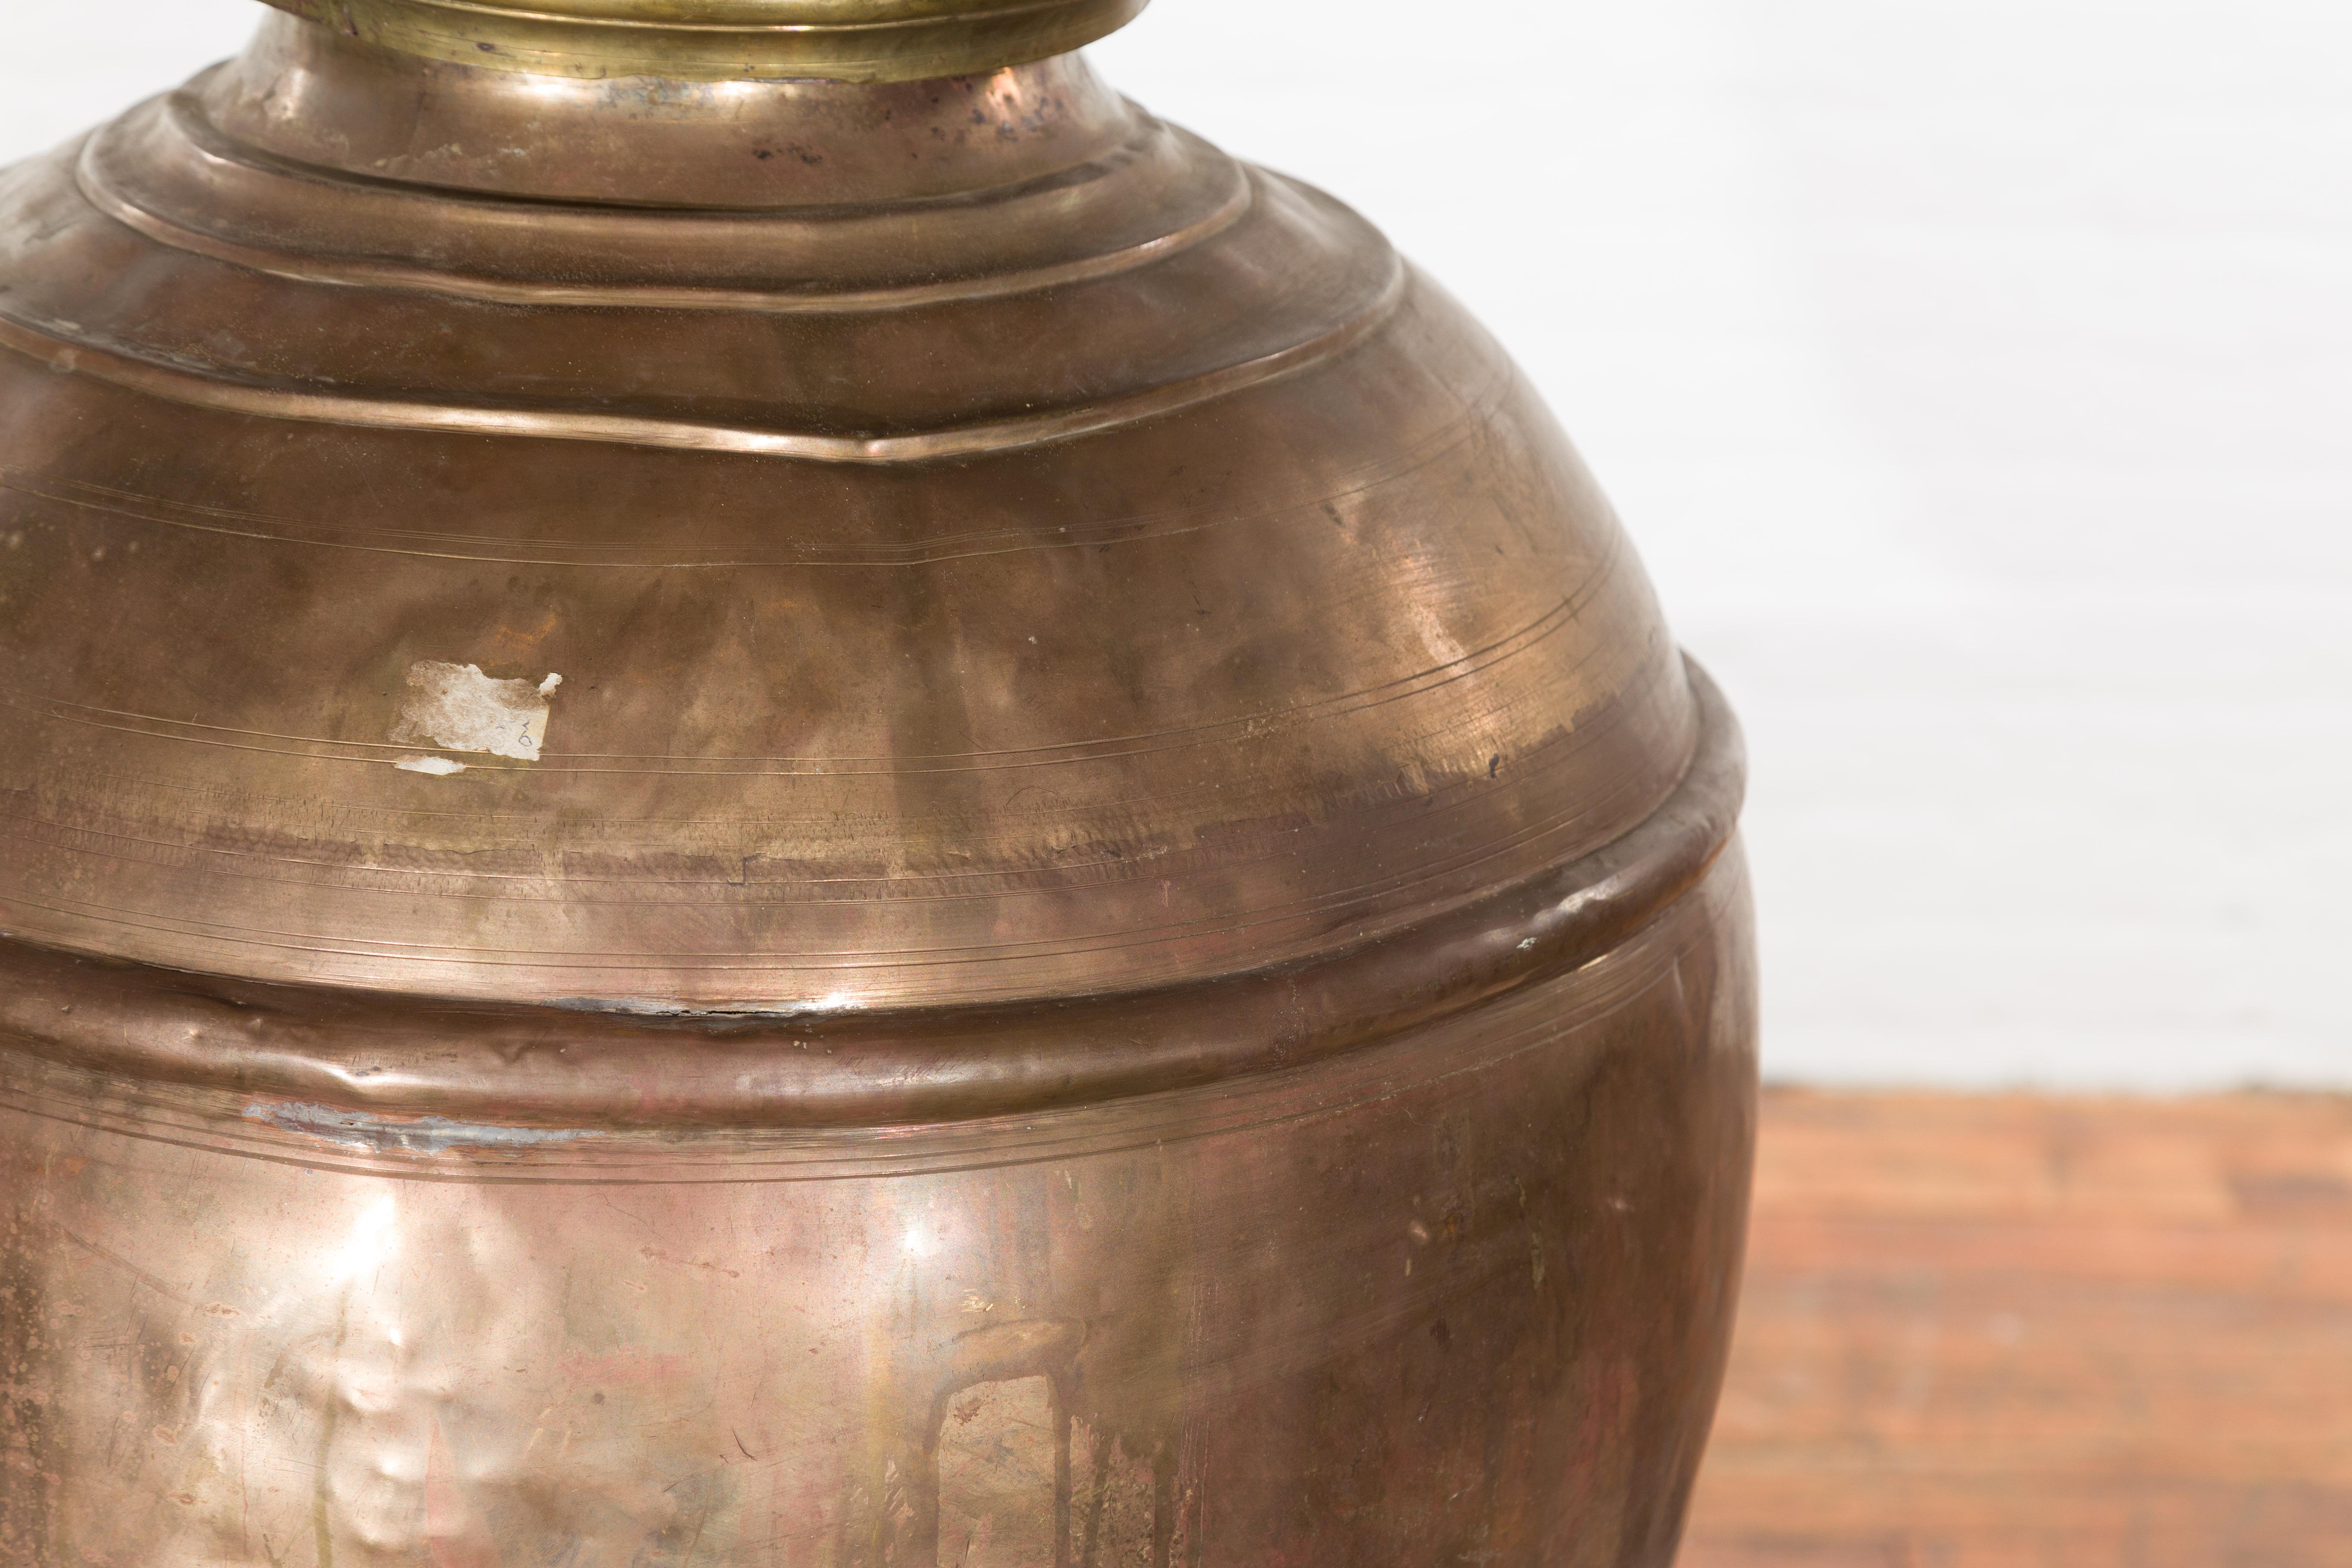 Indian Vintage Brass Water Jar with Concentric Rings and Distressed Appearance 5